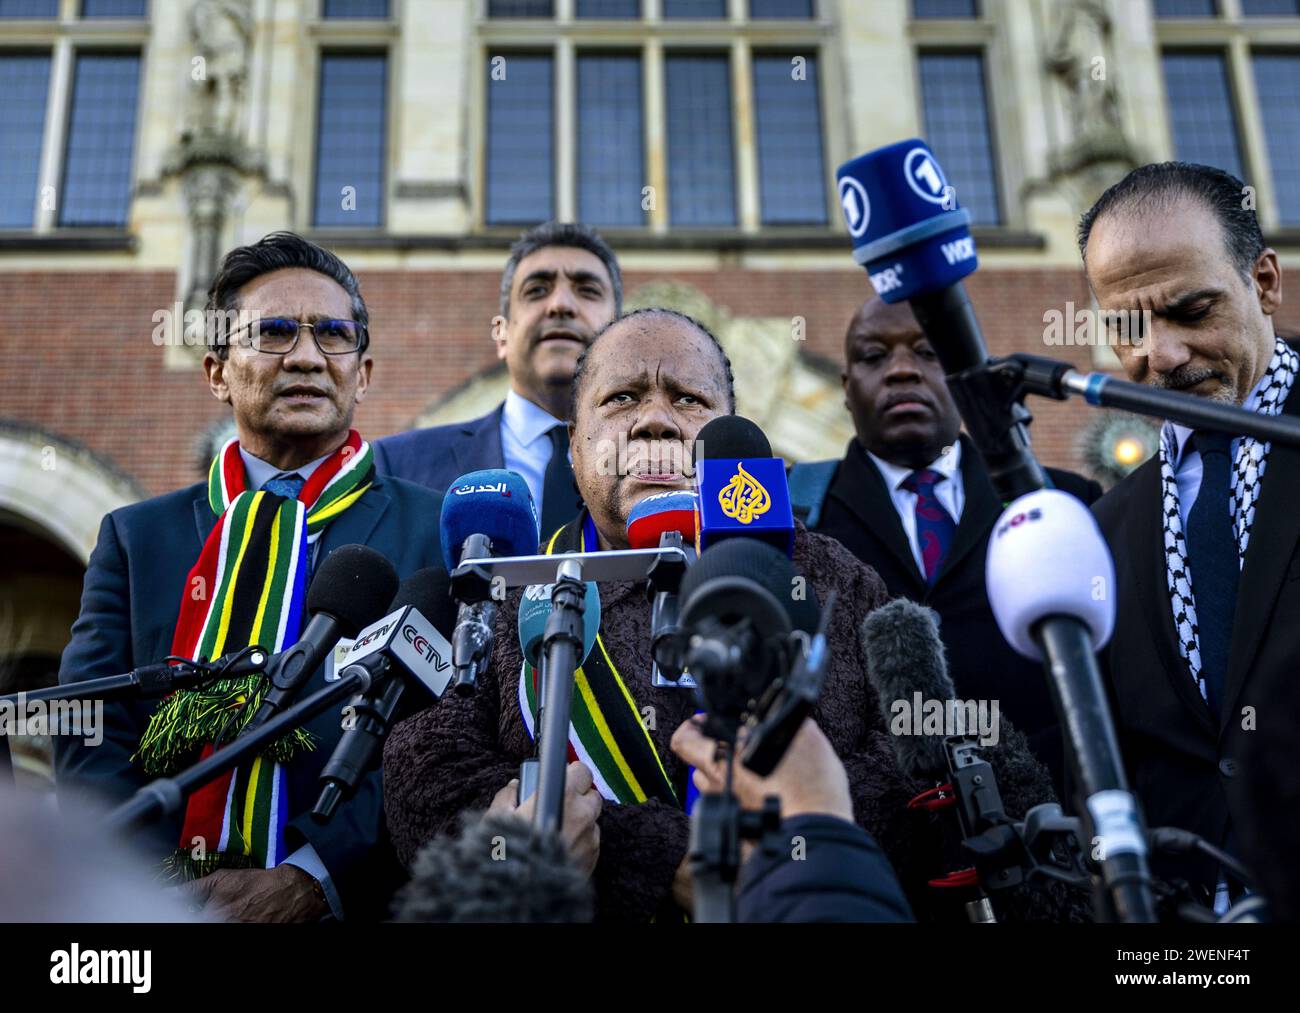 THE HAGUE - South African Foreign Minister Naledi Pandor speaks to the international press following a ruling by the International Court of Justice (ICJ) on a request from South Africa for emergency measures for Gaza. Earlier this month, the court heard the genocide case against Israel, brought by South Africa. The entire case can take years to complete. ANP REMKO DE WAAL netherlands out - belgium out Stock Photo